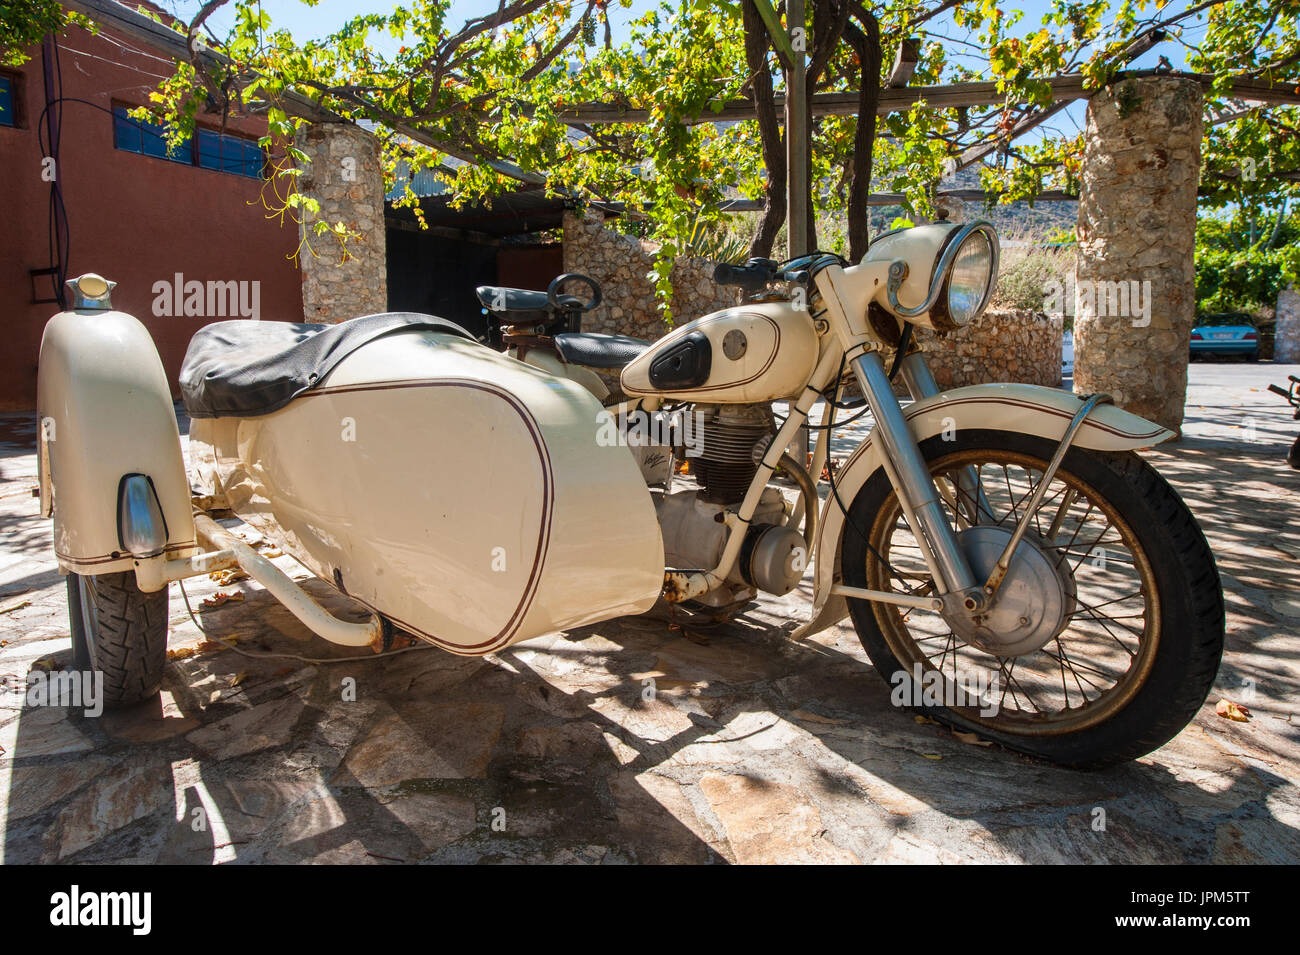 An old BMW motorbike with a side car in beautiful condition Stock Photo